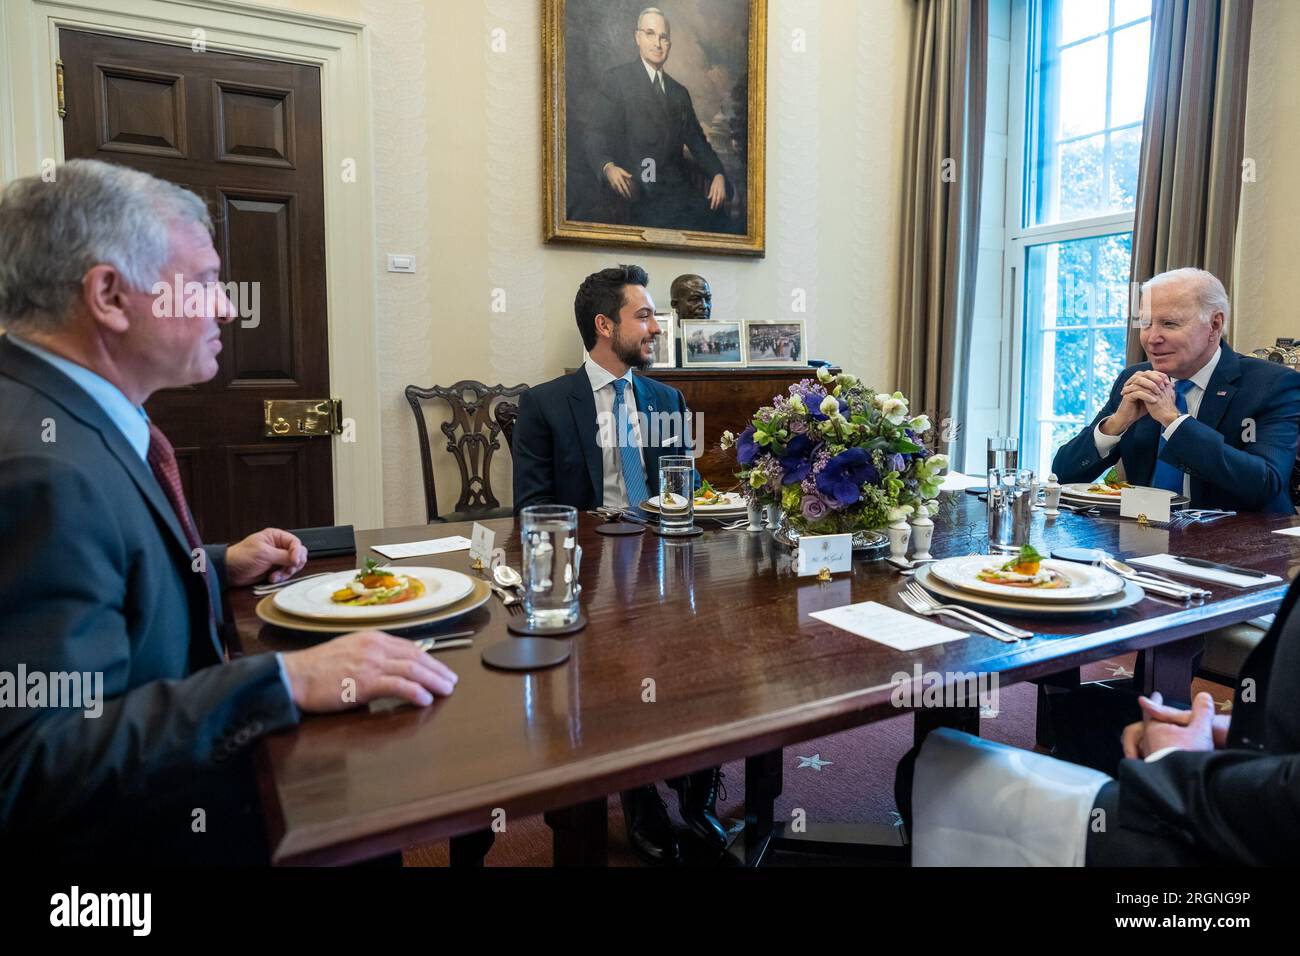 Reportage: President Joe Biden hosts a lunch with King Abdullah II and Crown Prince Hussein of Jordan, Thursday, February 2, 2023, in the Oval Office Private Dining Room of the White House. Stock Photo